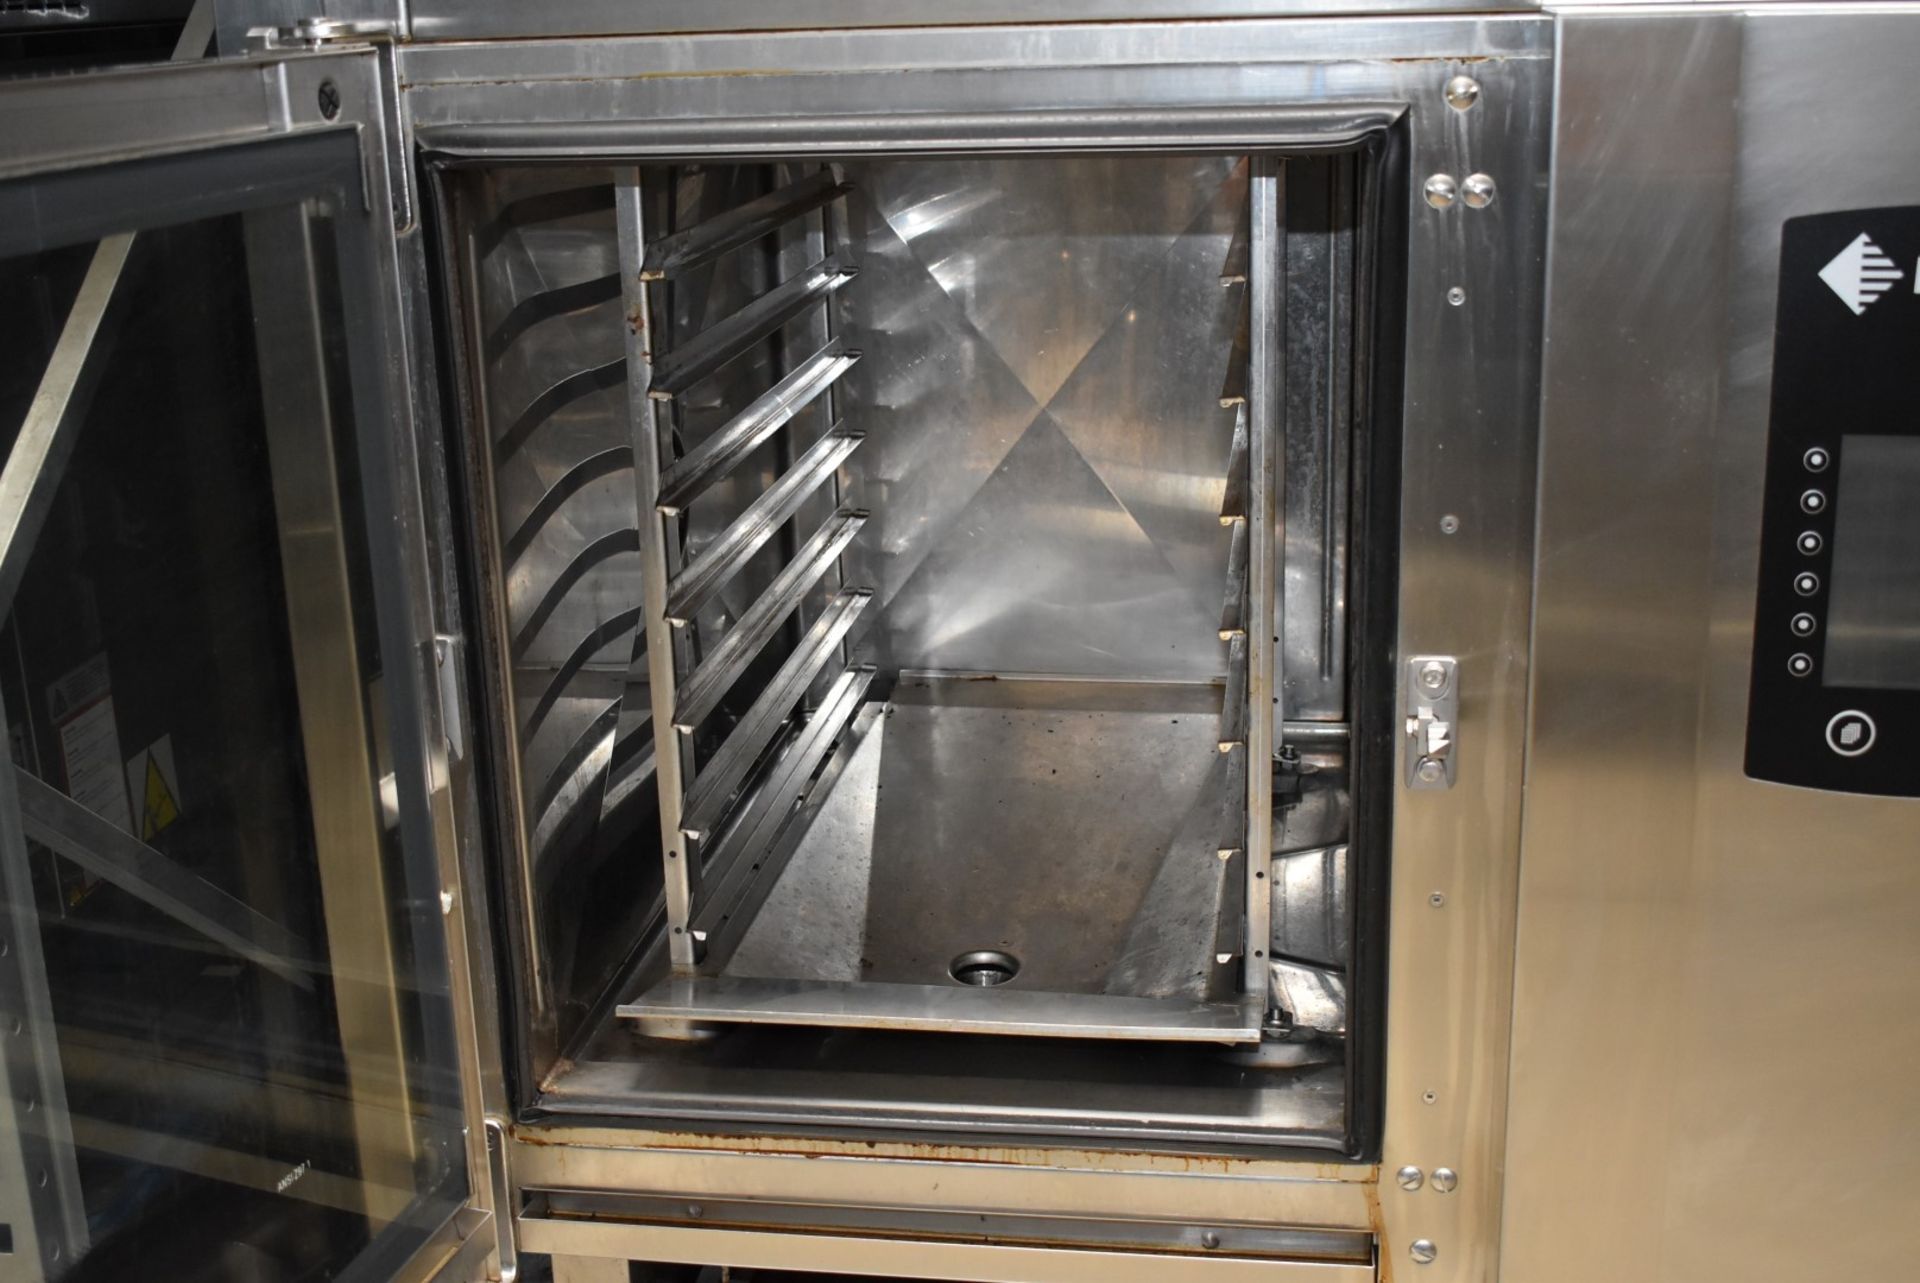 1 x Houno Double 6 Grid Stacked Combi Oven - Model: C 1.06 / CPE 1.06 - 3 Phase - Image 11 of 21